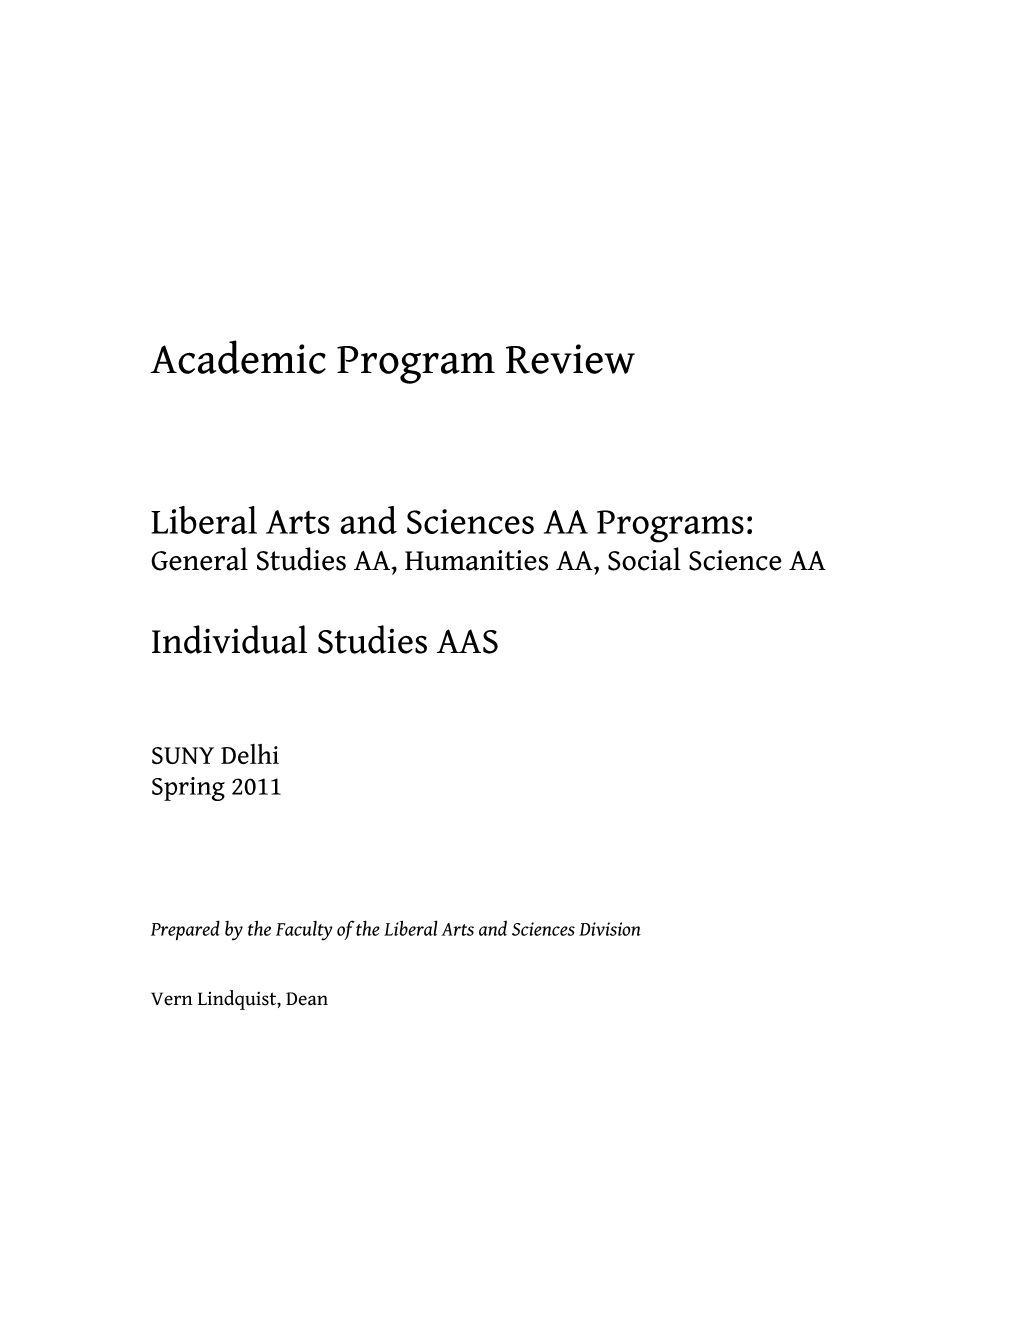 Liberal Arts and Sciences Program Review 2011 1